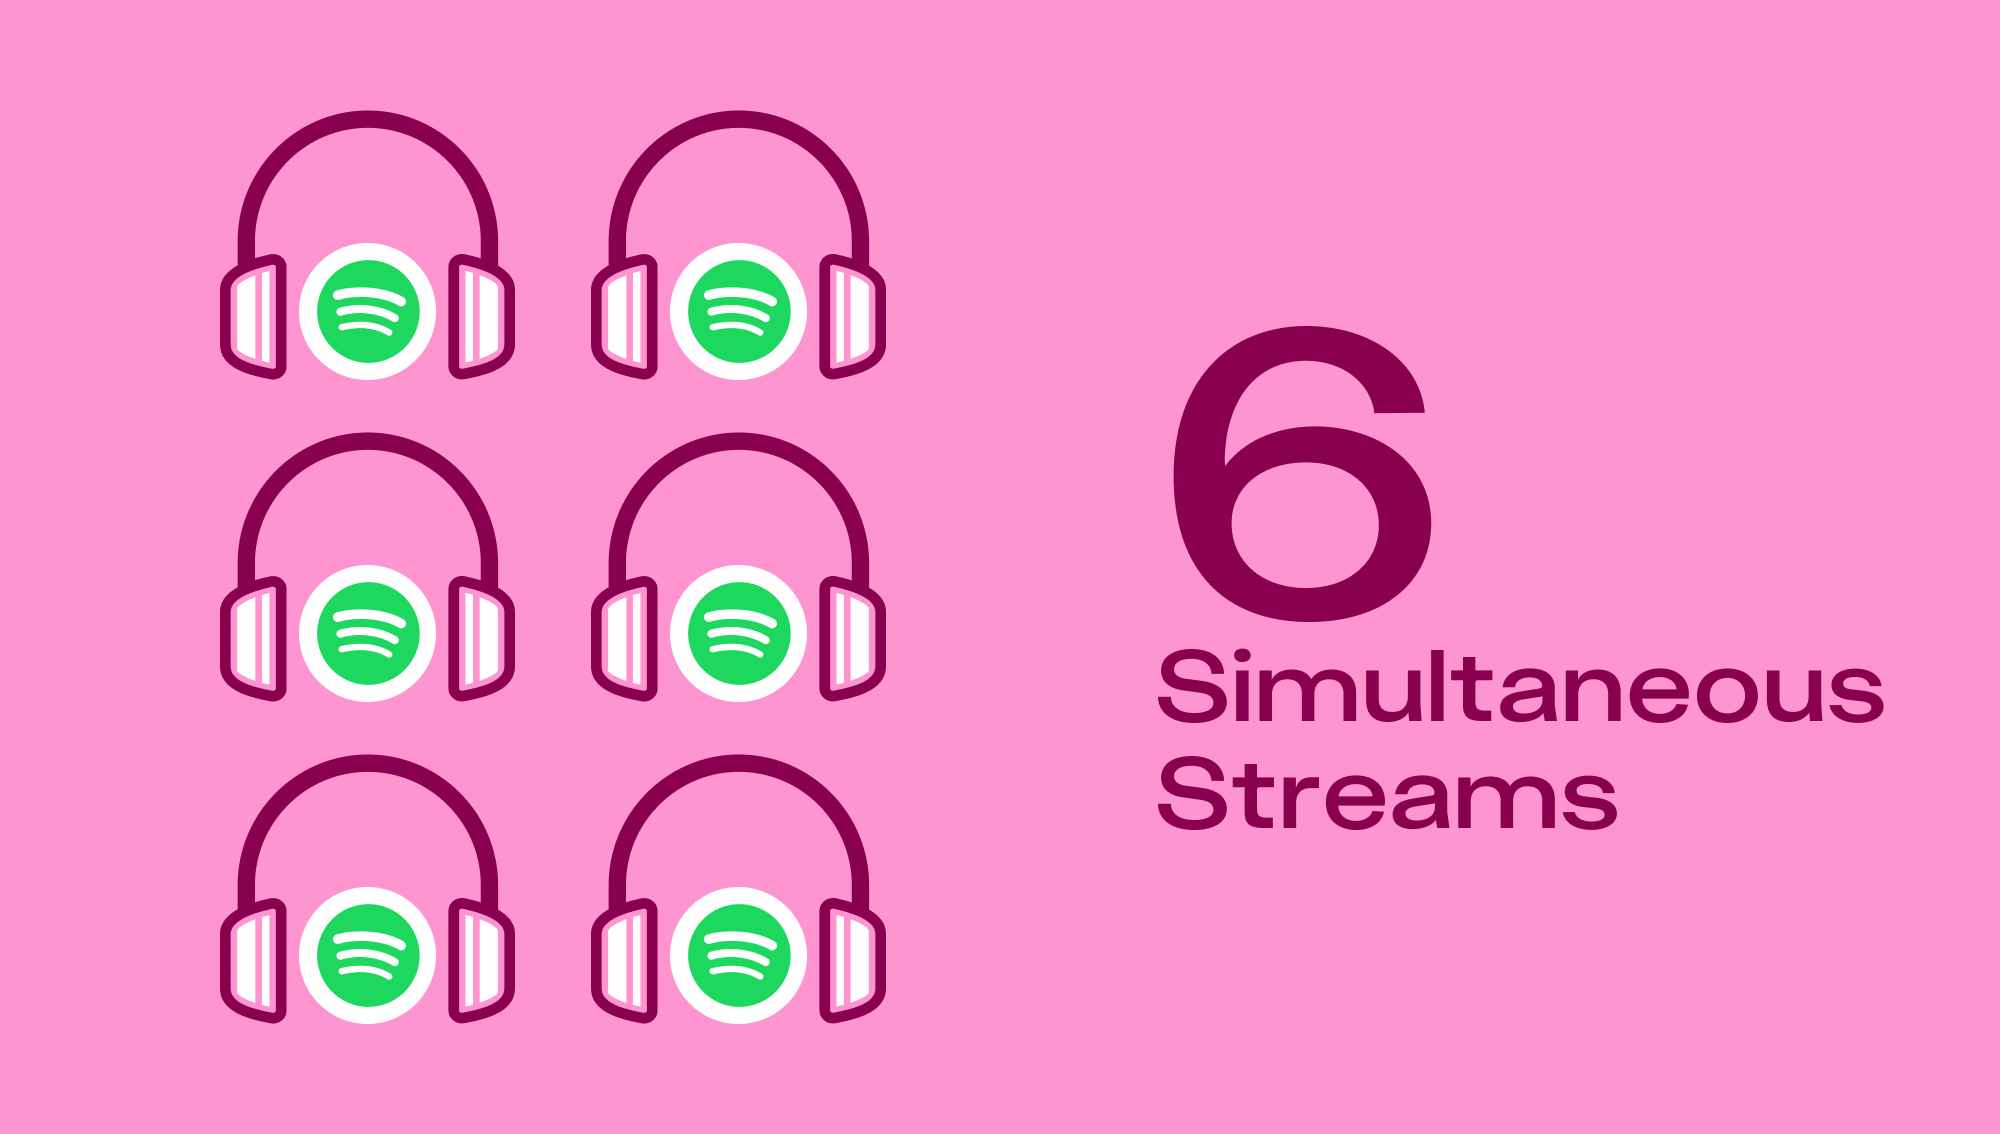 Spotify offers 6 streams at a time